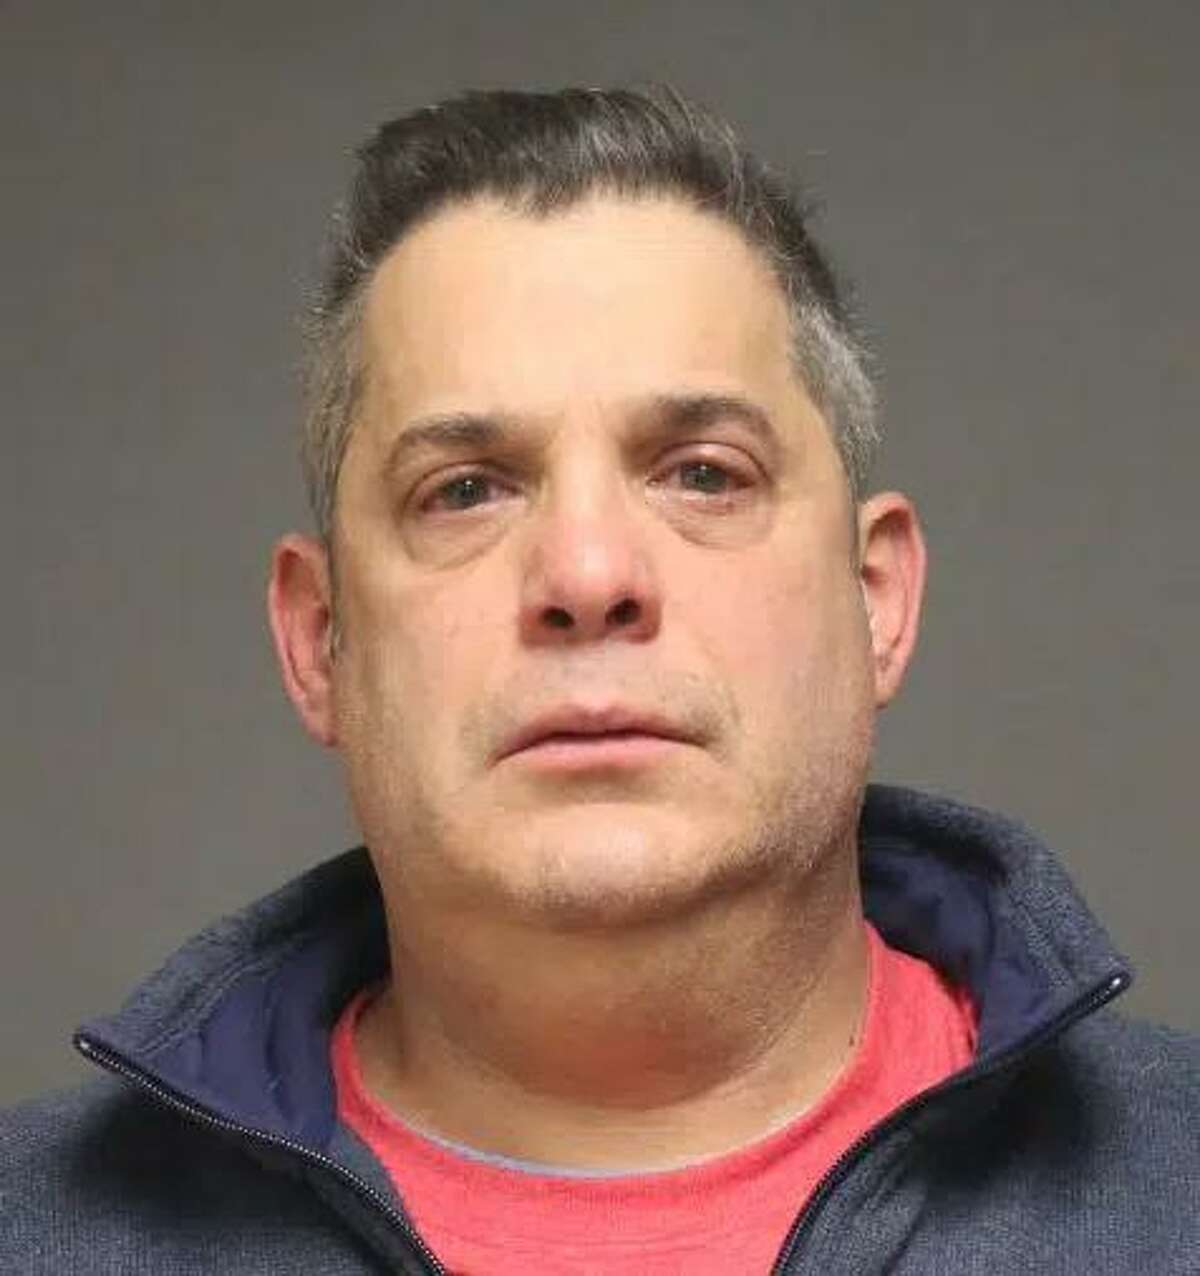 James Iannazzo was arrested and charged with a hate crime in Fairfield, Connecticut.